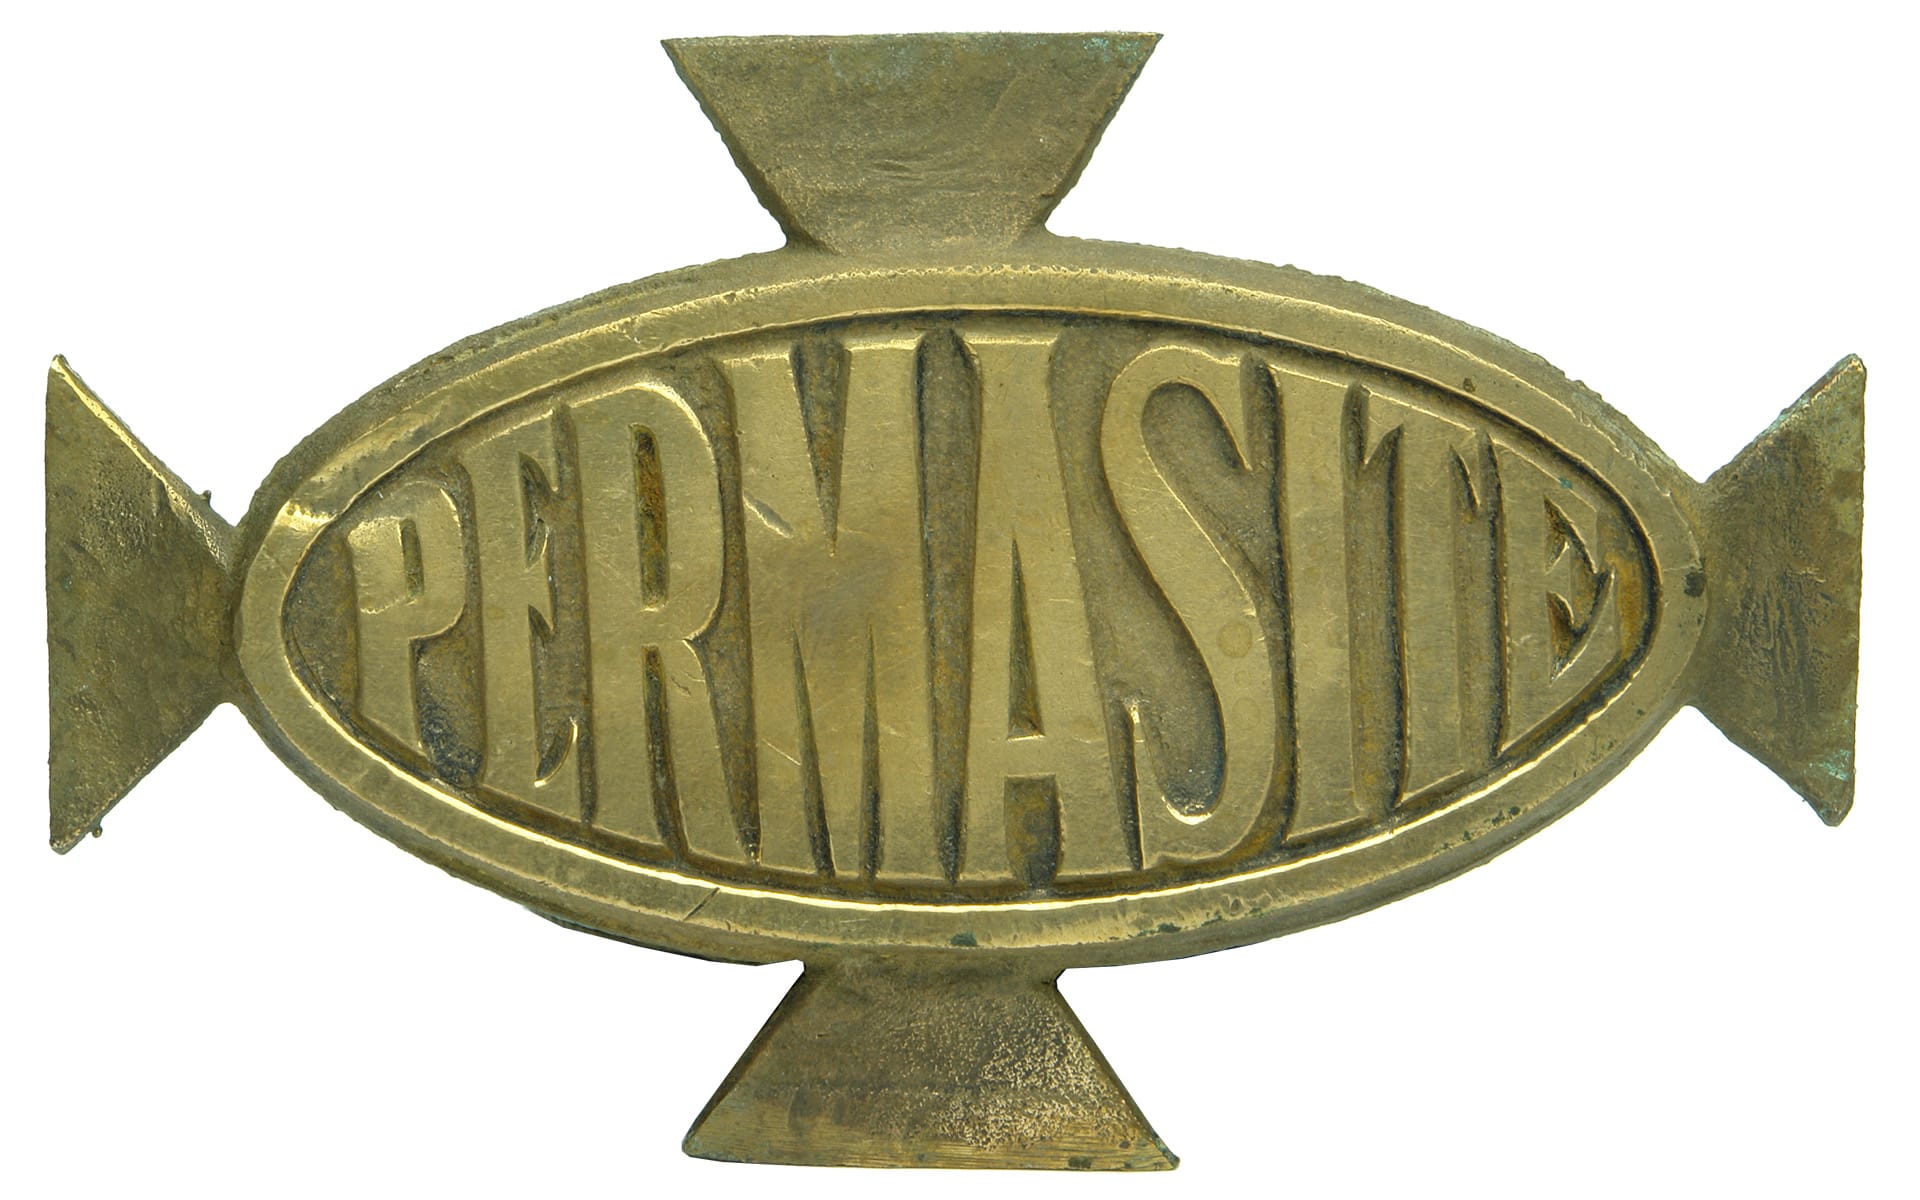 Permasite Brass Name Plate